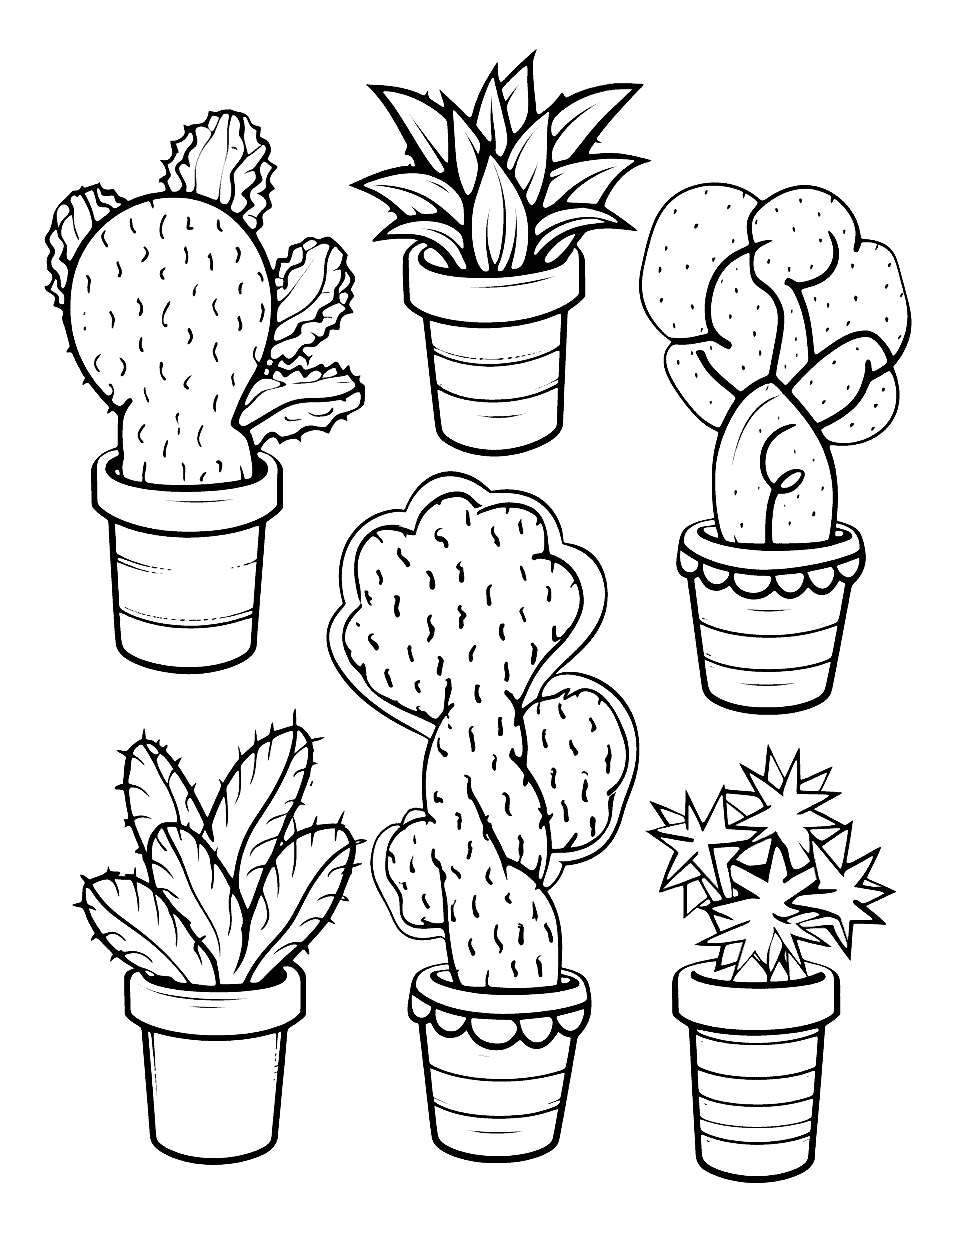 Decorated Cacti Christmas Coloring Page - For those in warmer climates, a Christmas scene featuring decorated cacti instead of fir trees.